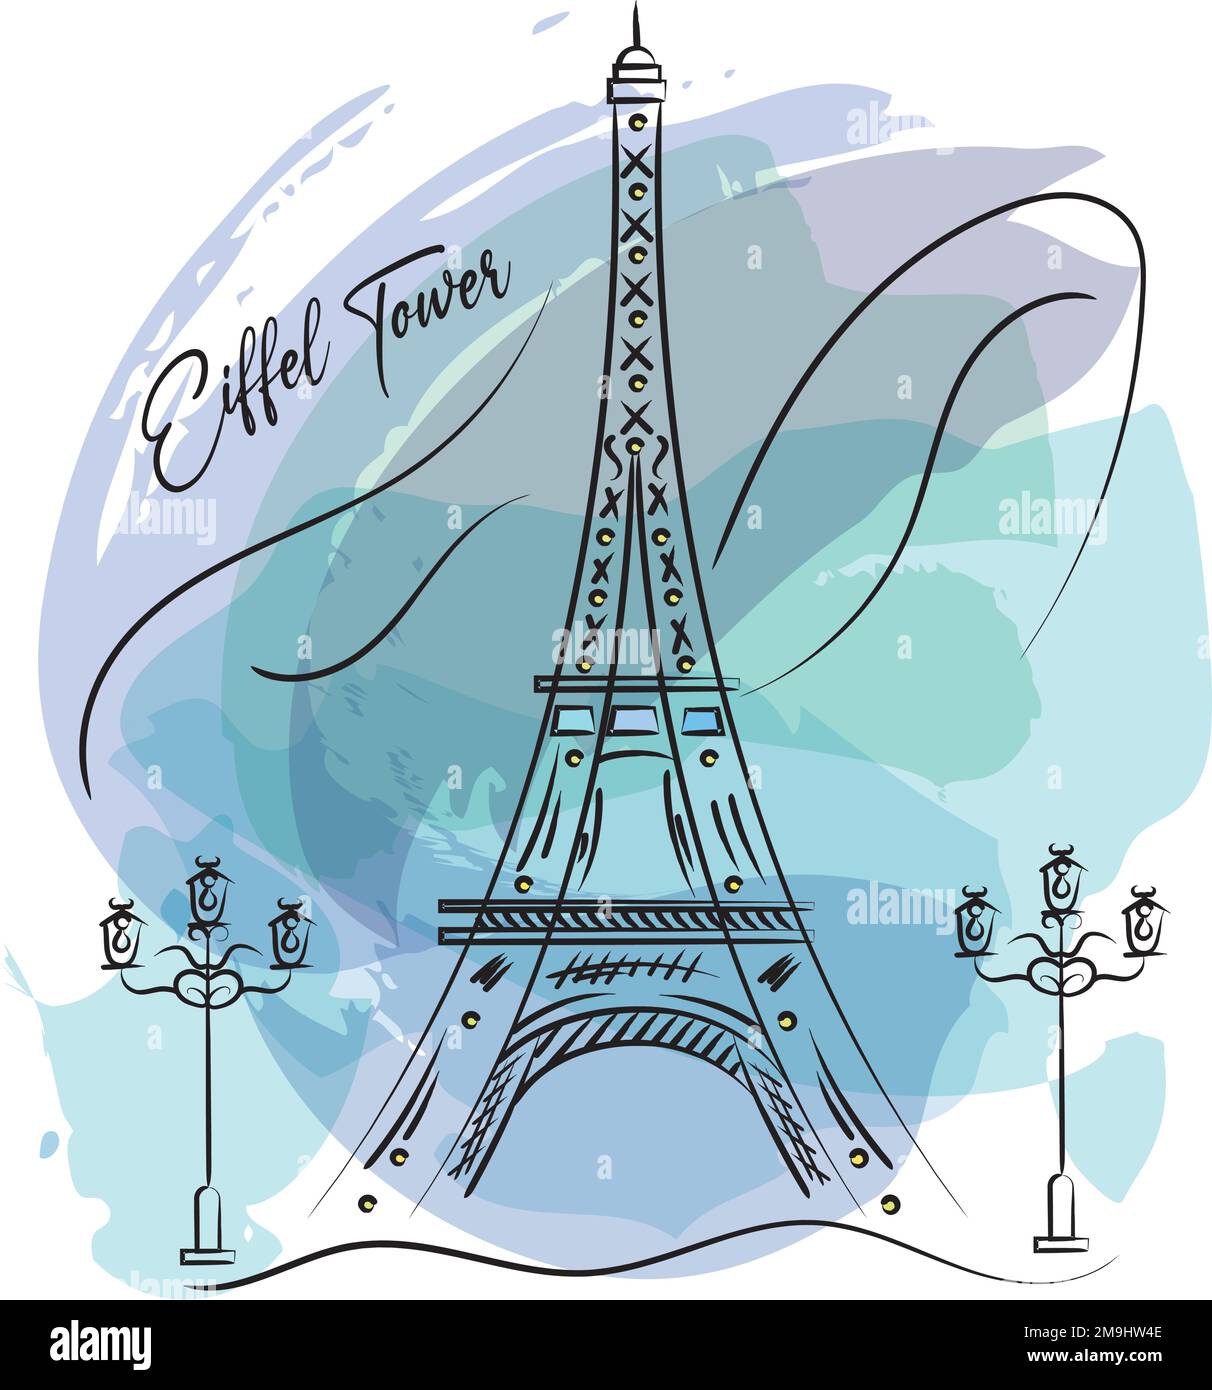 Eiffel Tower in Paris France. Vector Simple Sketch Style Illustration.  Stock Vector - Illustration of romantic, drawn: 153973406